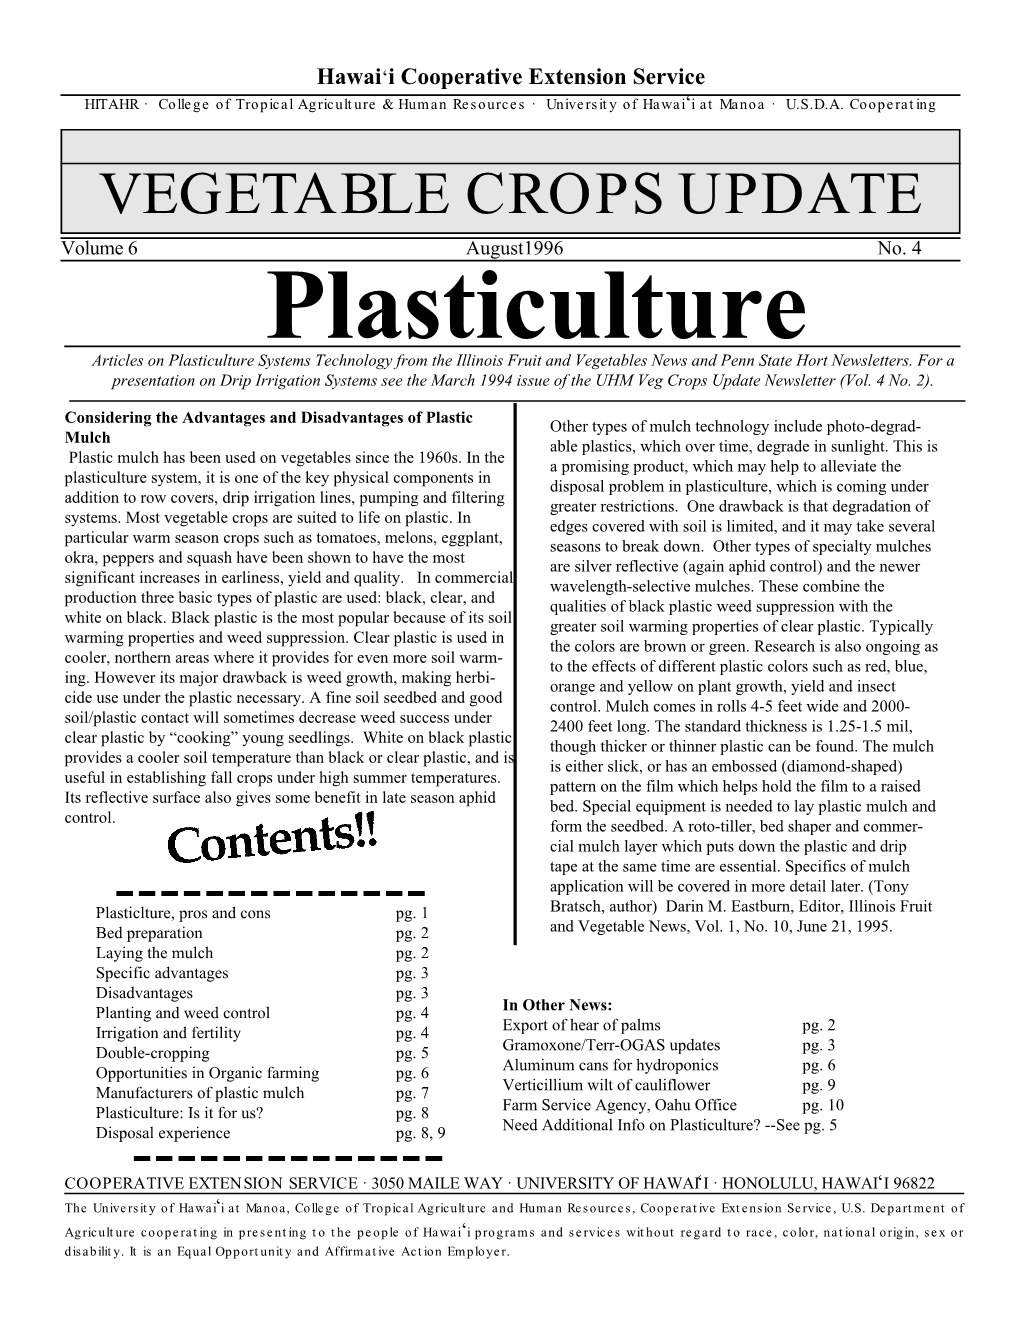 Plasticulture Articles on Plasticulture Systems Technology from the Illinois Fruit and Vegetables News and Penn State Hort Newsletters